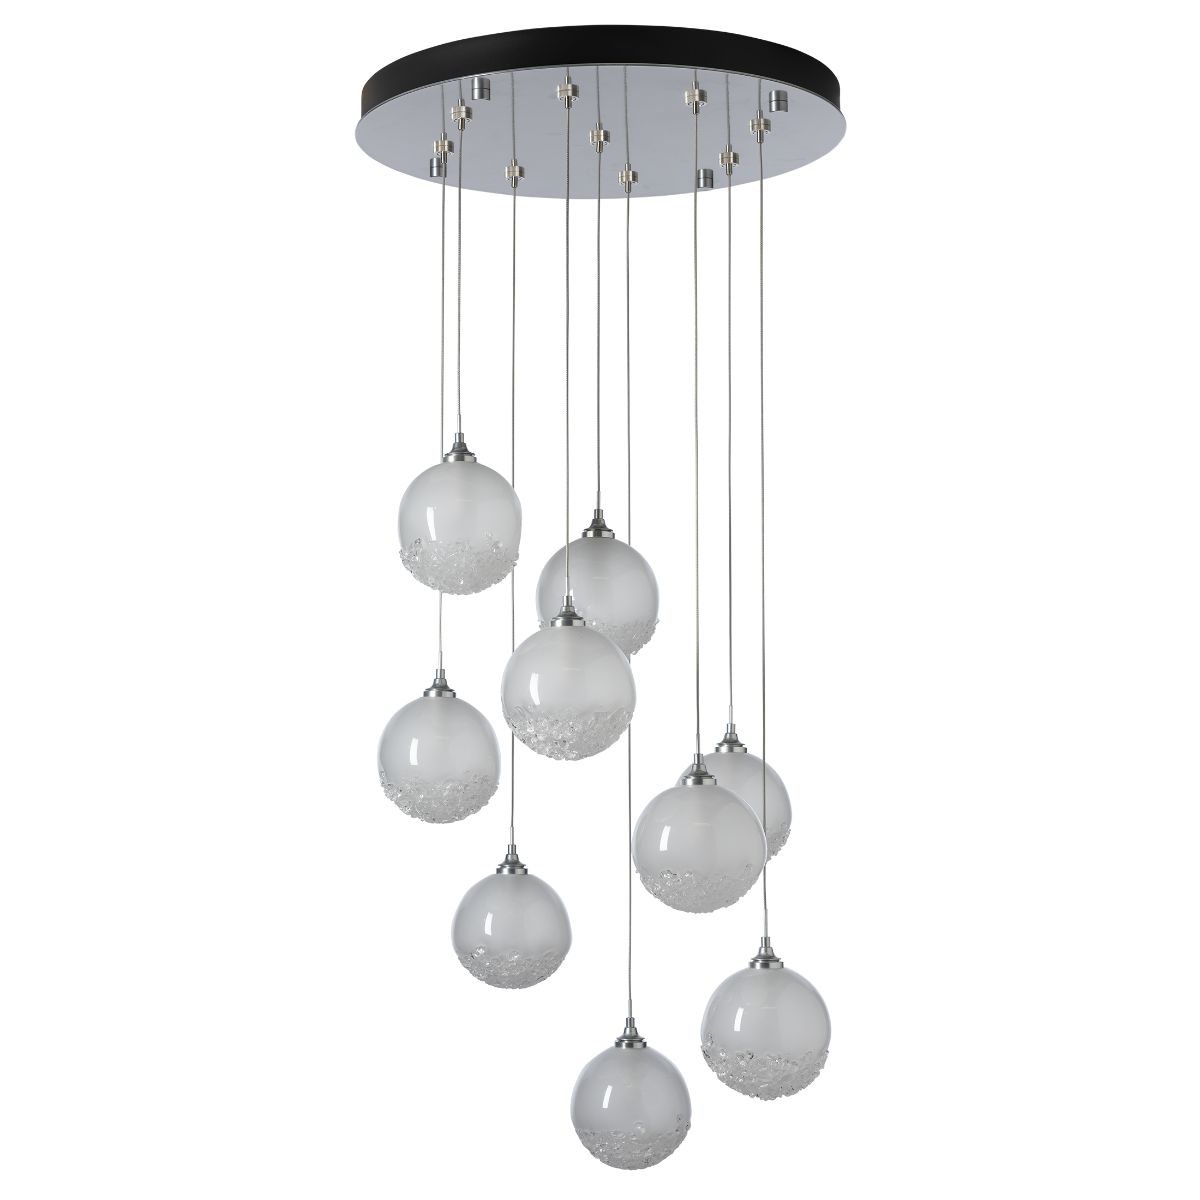 Fritz 9 lights Pendant Light with Long Height - Bees Lighting